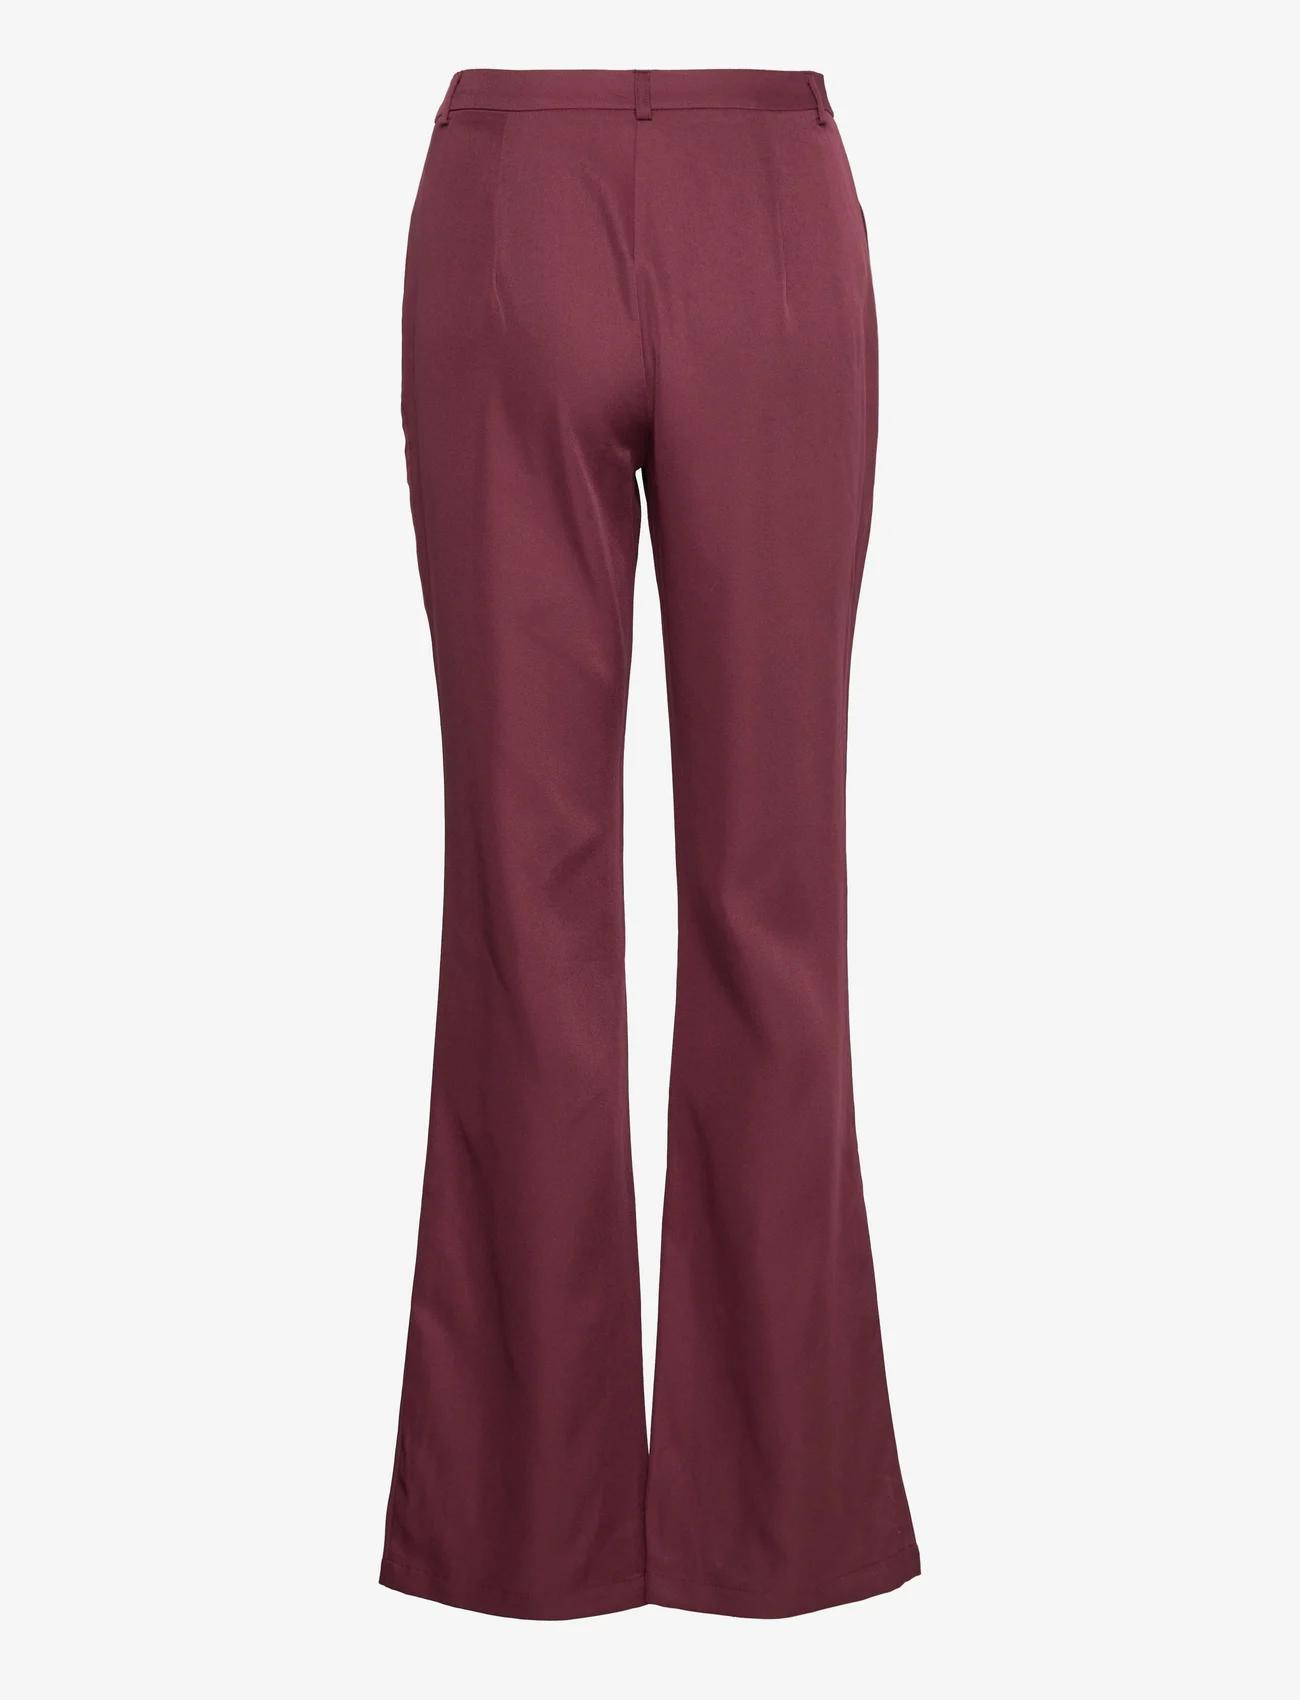 ONLY - ONLNABI MW FLARED PANT TLR - women - tawny port - 1